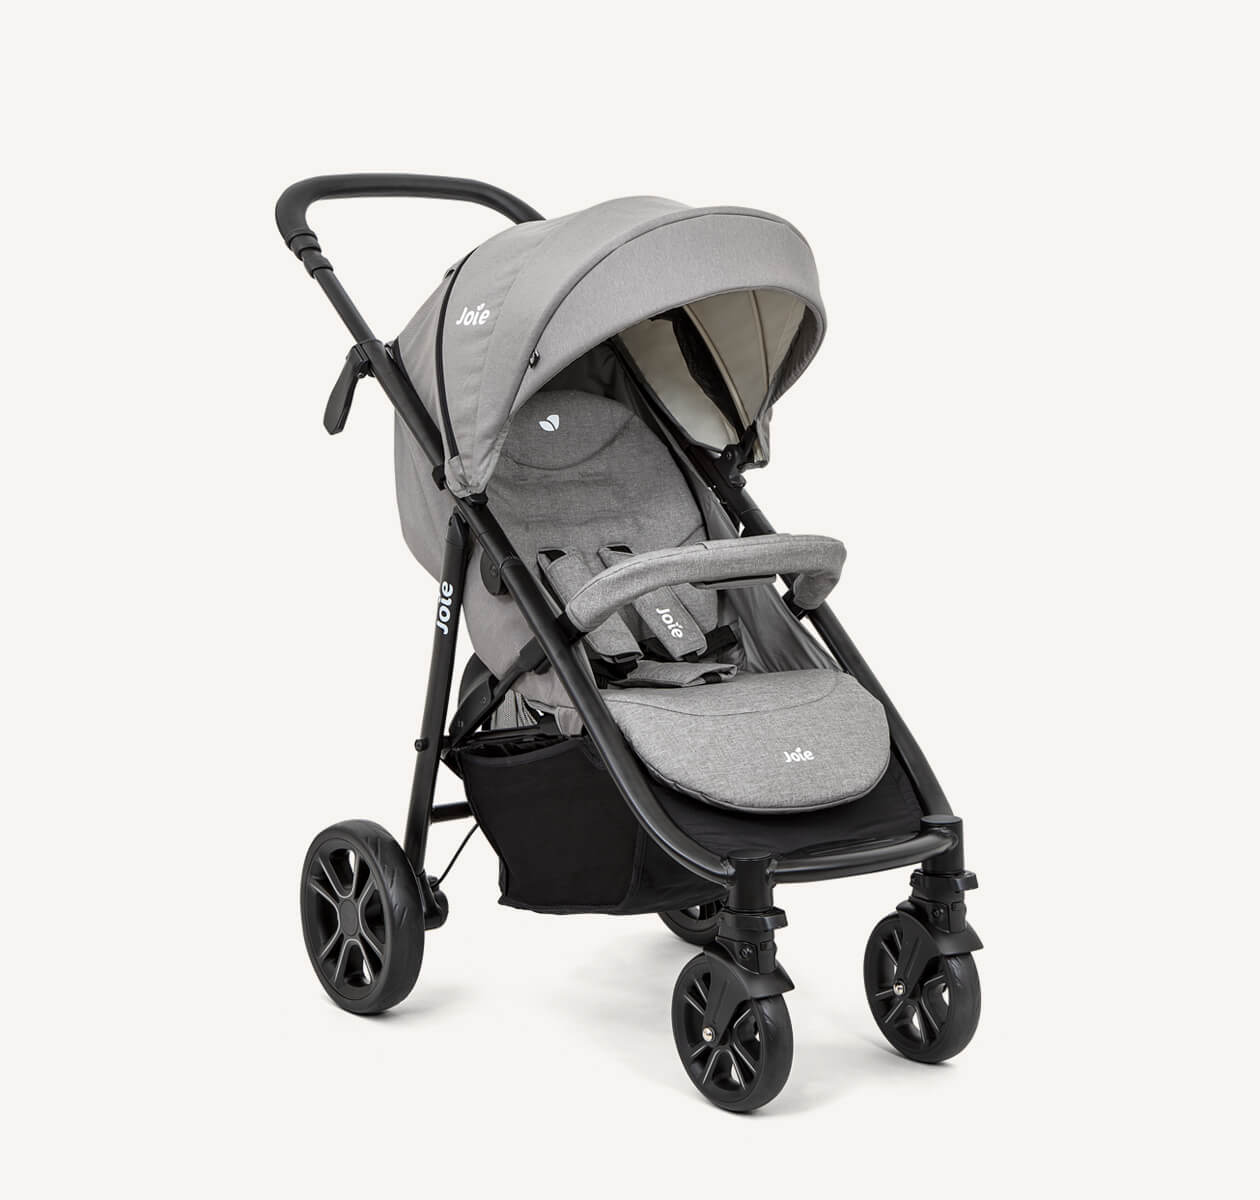 Joie litetrax 4 dlx stroller in gray at an angle. 